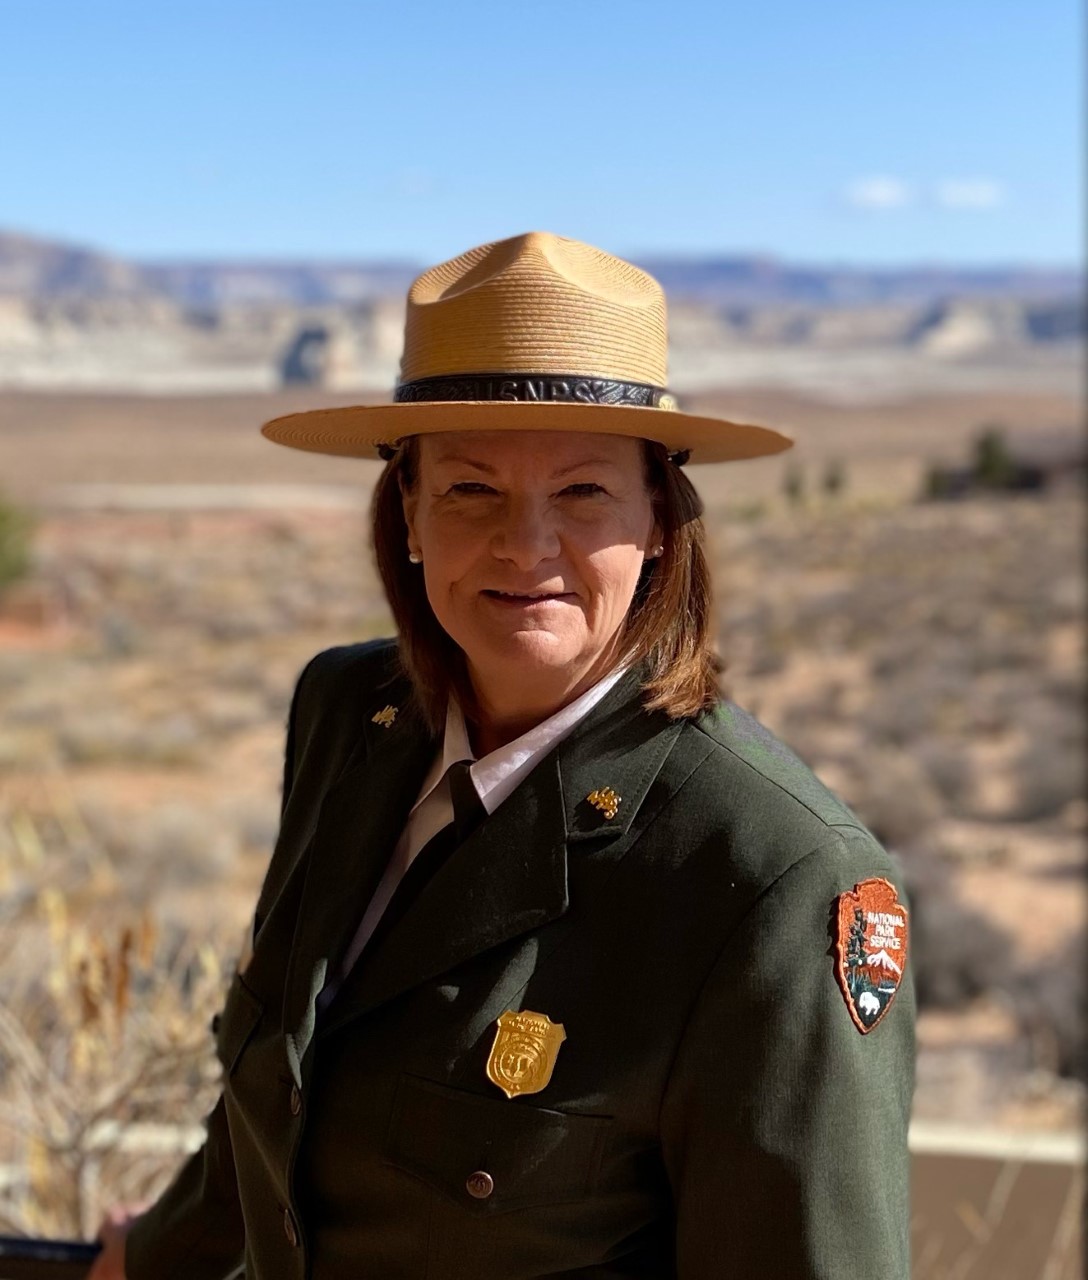 Park ranger in formal uniform outdoors smiling at the camera